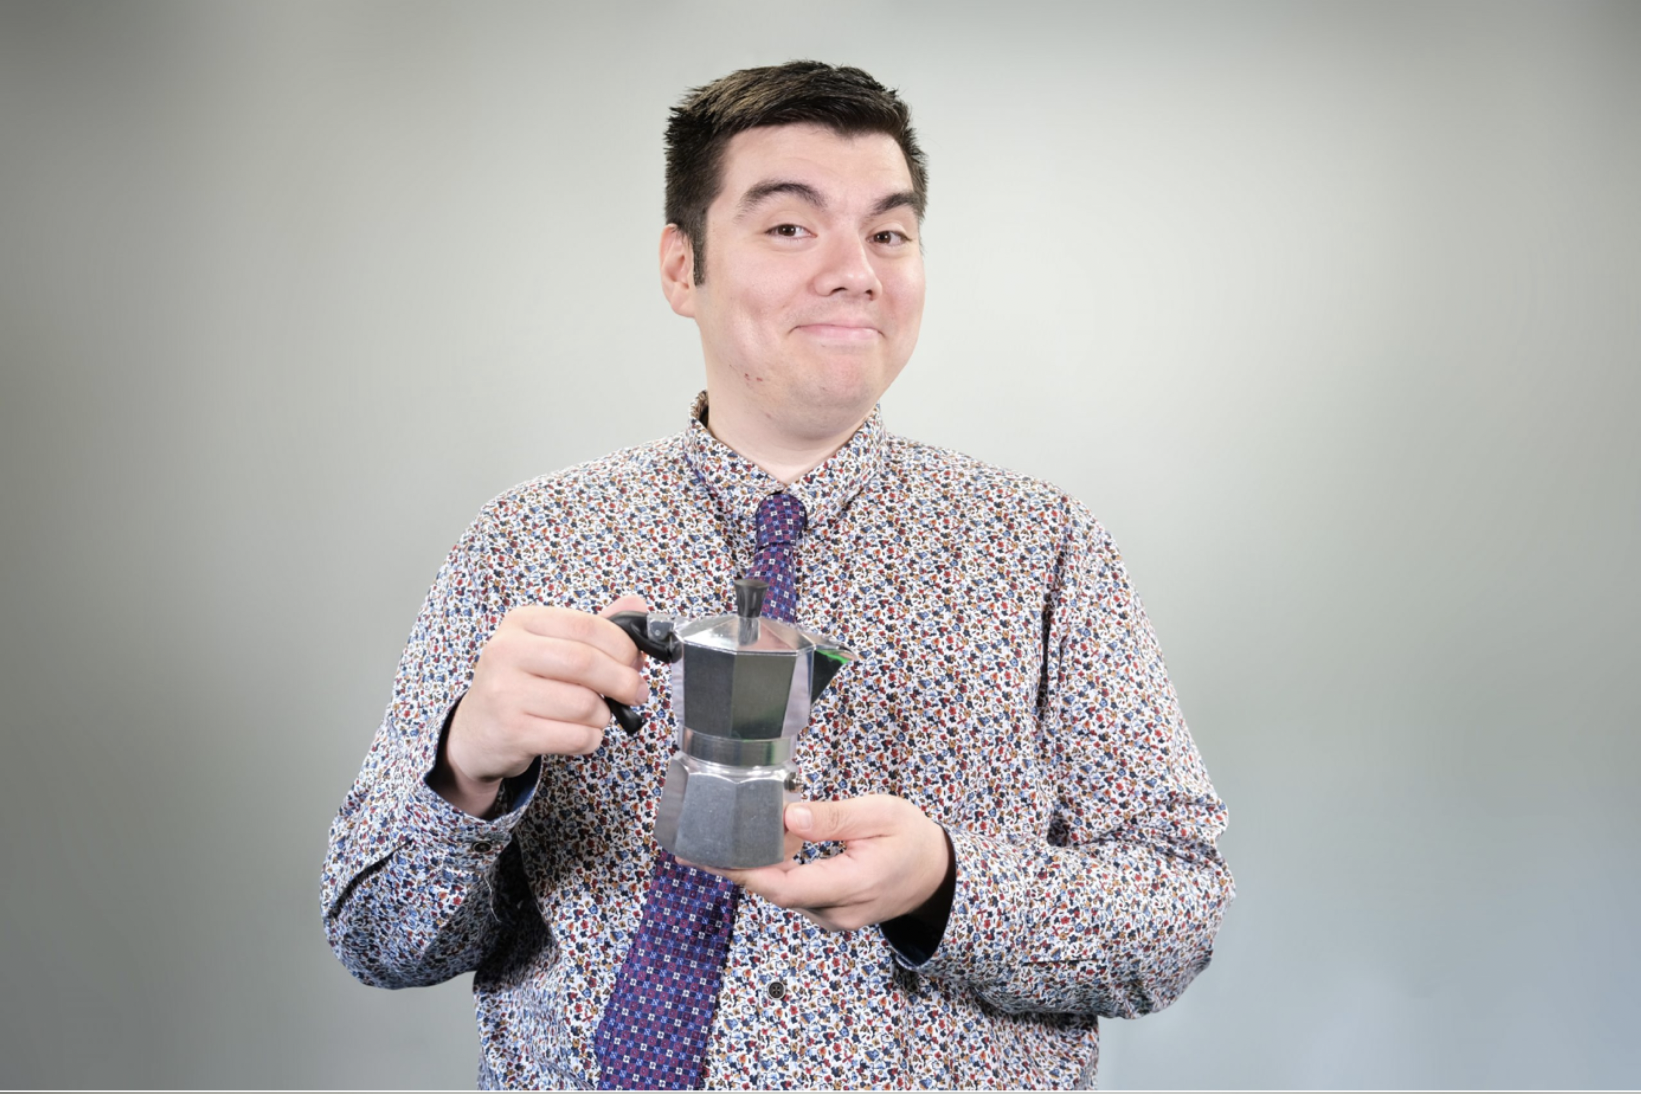 Man wearing colorful shirt and tie, holding a moka pot